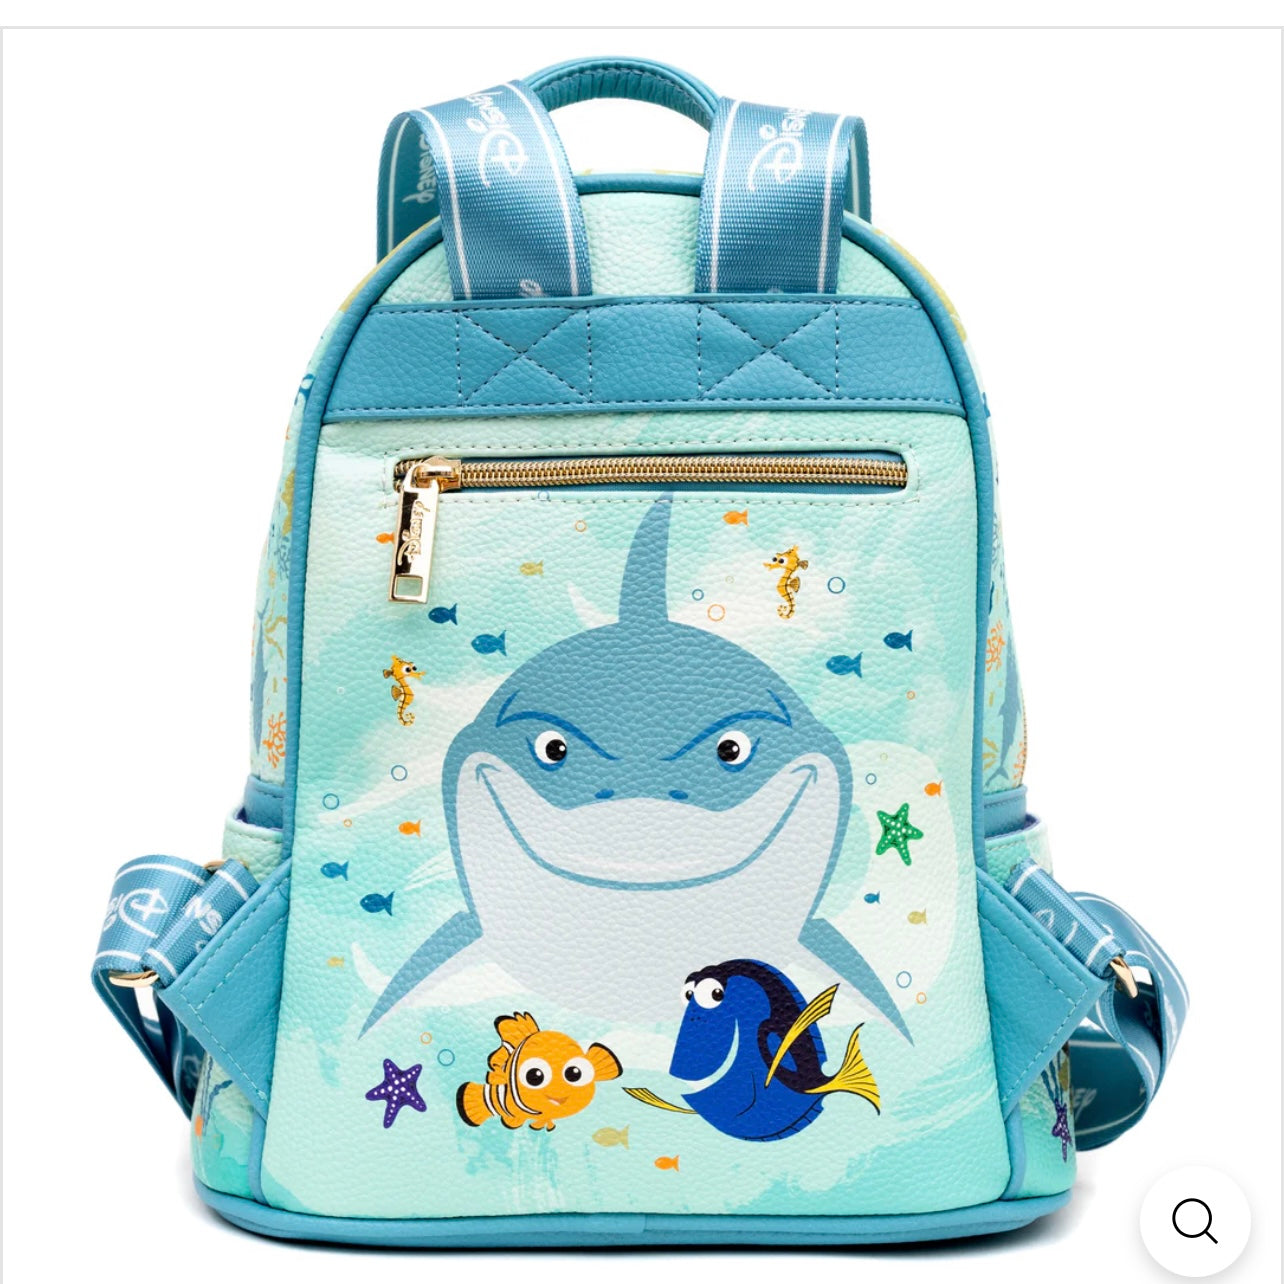 Exclusive Limited Edition-Nemo Vegan Leather Backpack